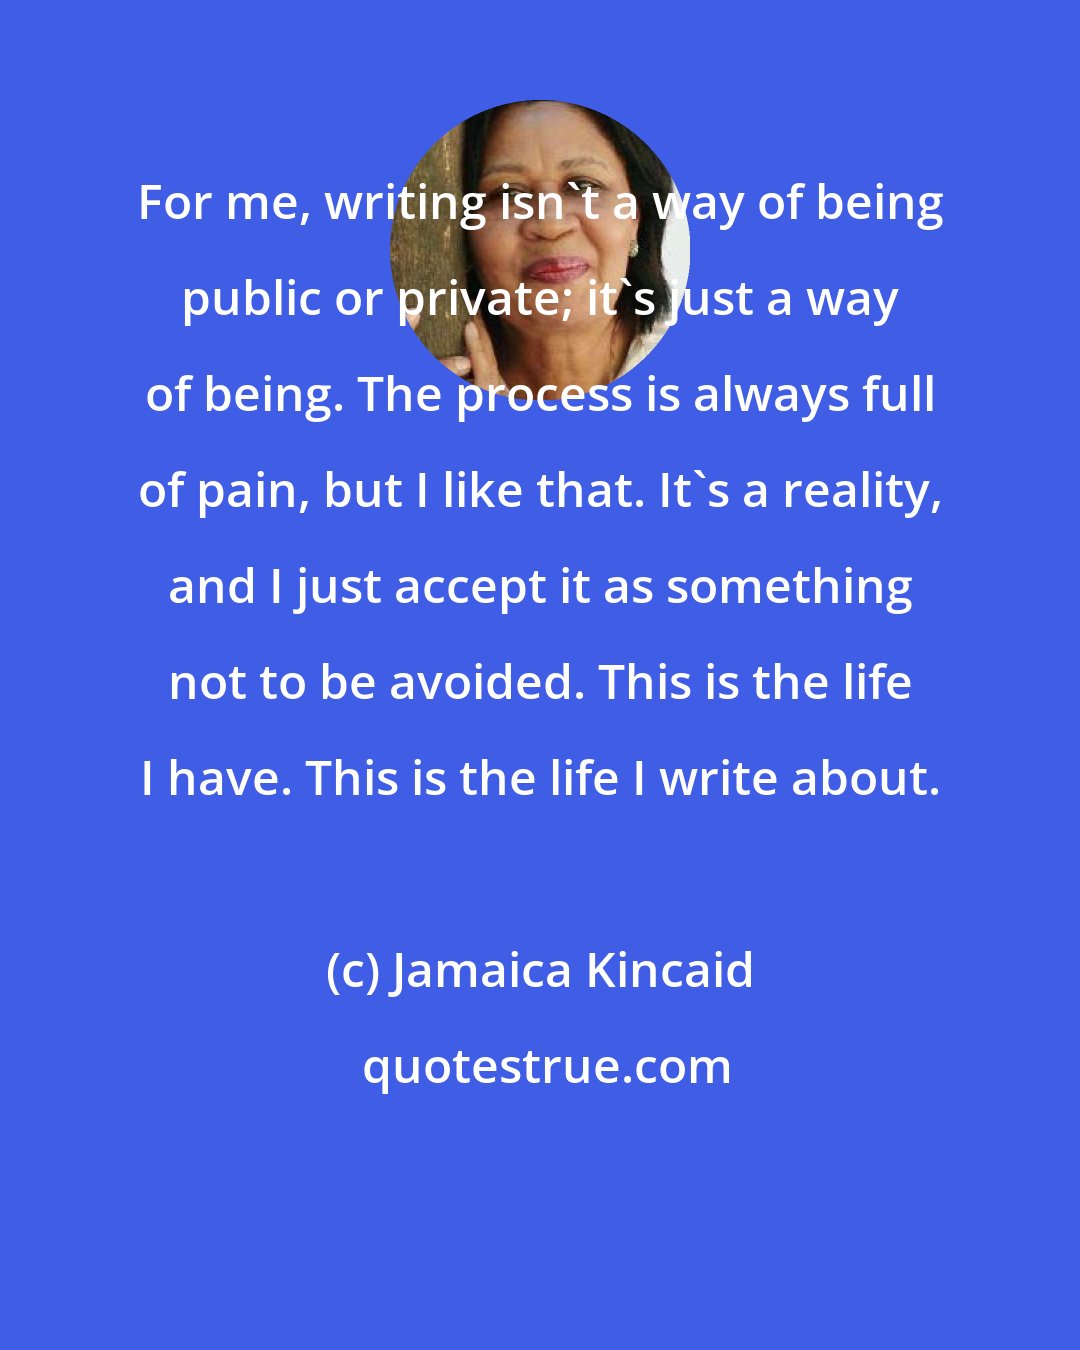 Jamaica Kincaid: For me, writing isn't a way of being public or private; it's just a way of being. The process is always full of pain, but I like that. It's a reality, and I just accept it as something not to be avoided. This is the life I have. This is the life I write about.